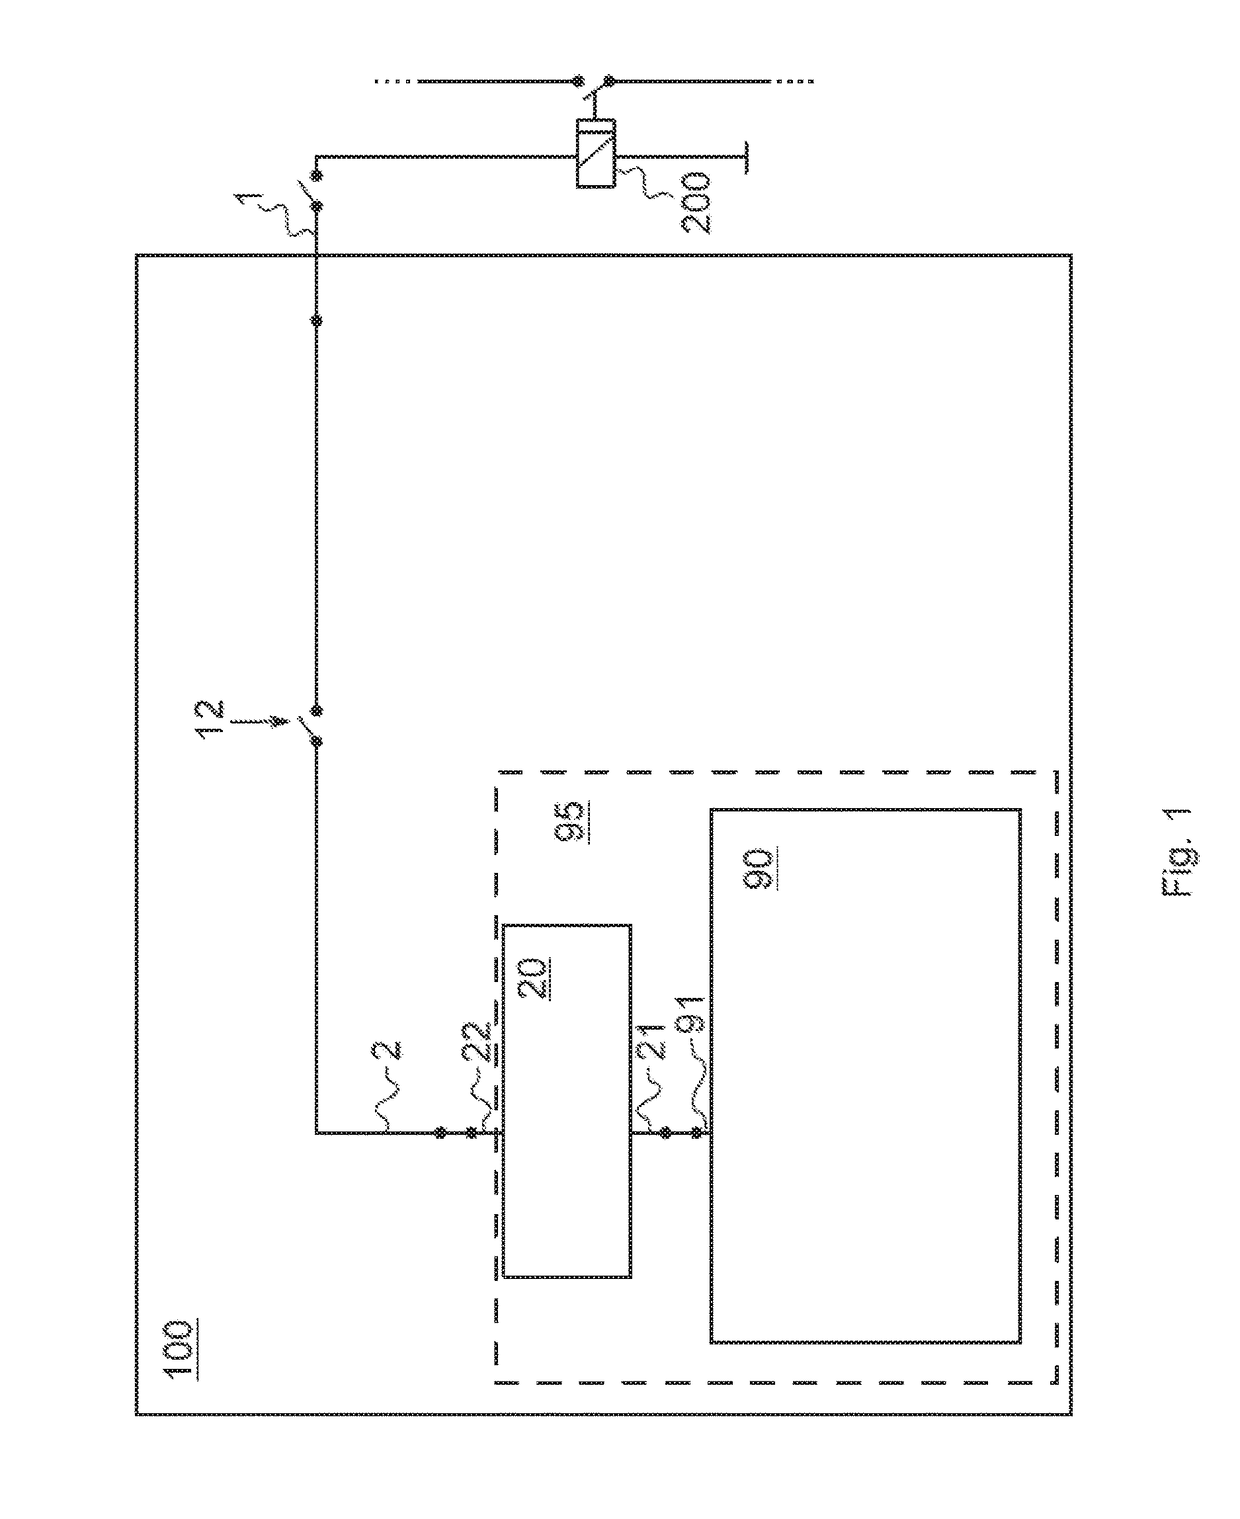 Driver circuit for the operation of a relay